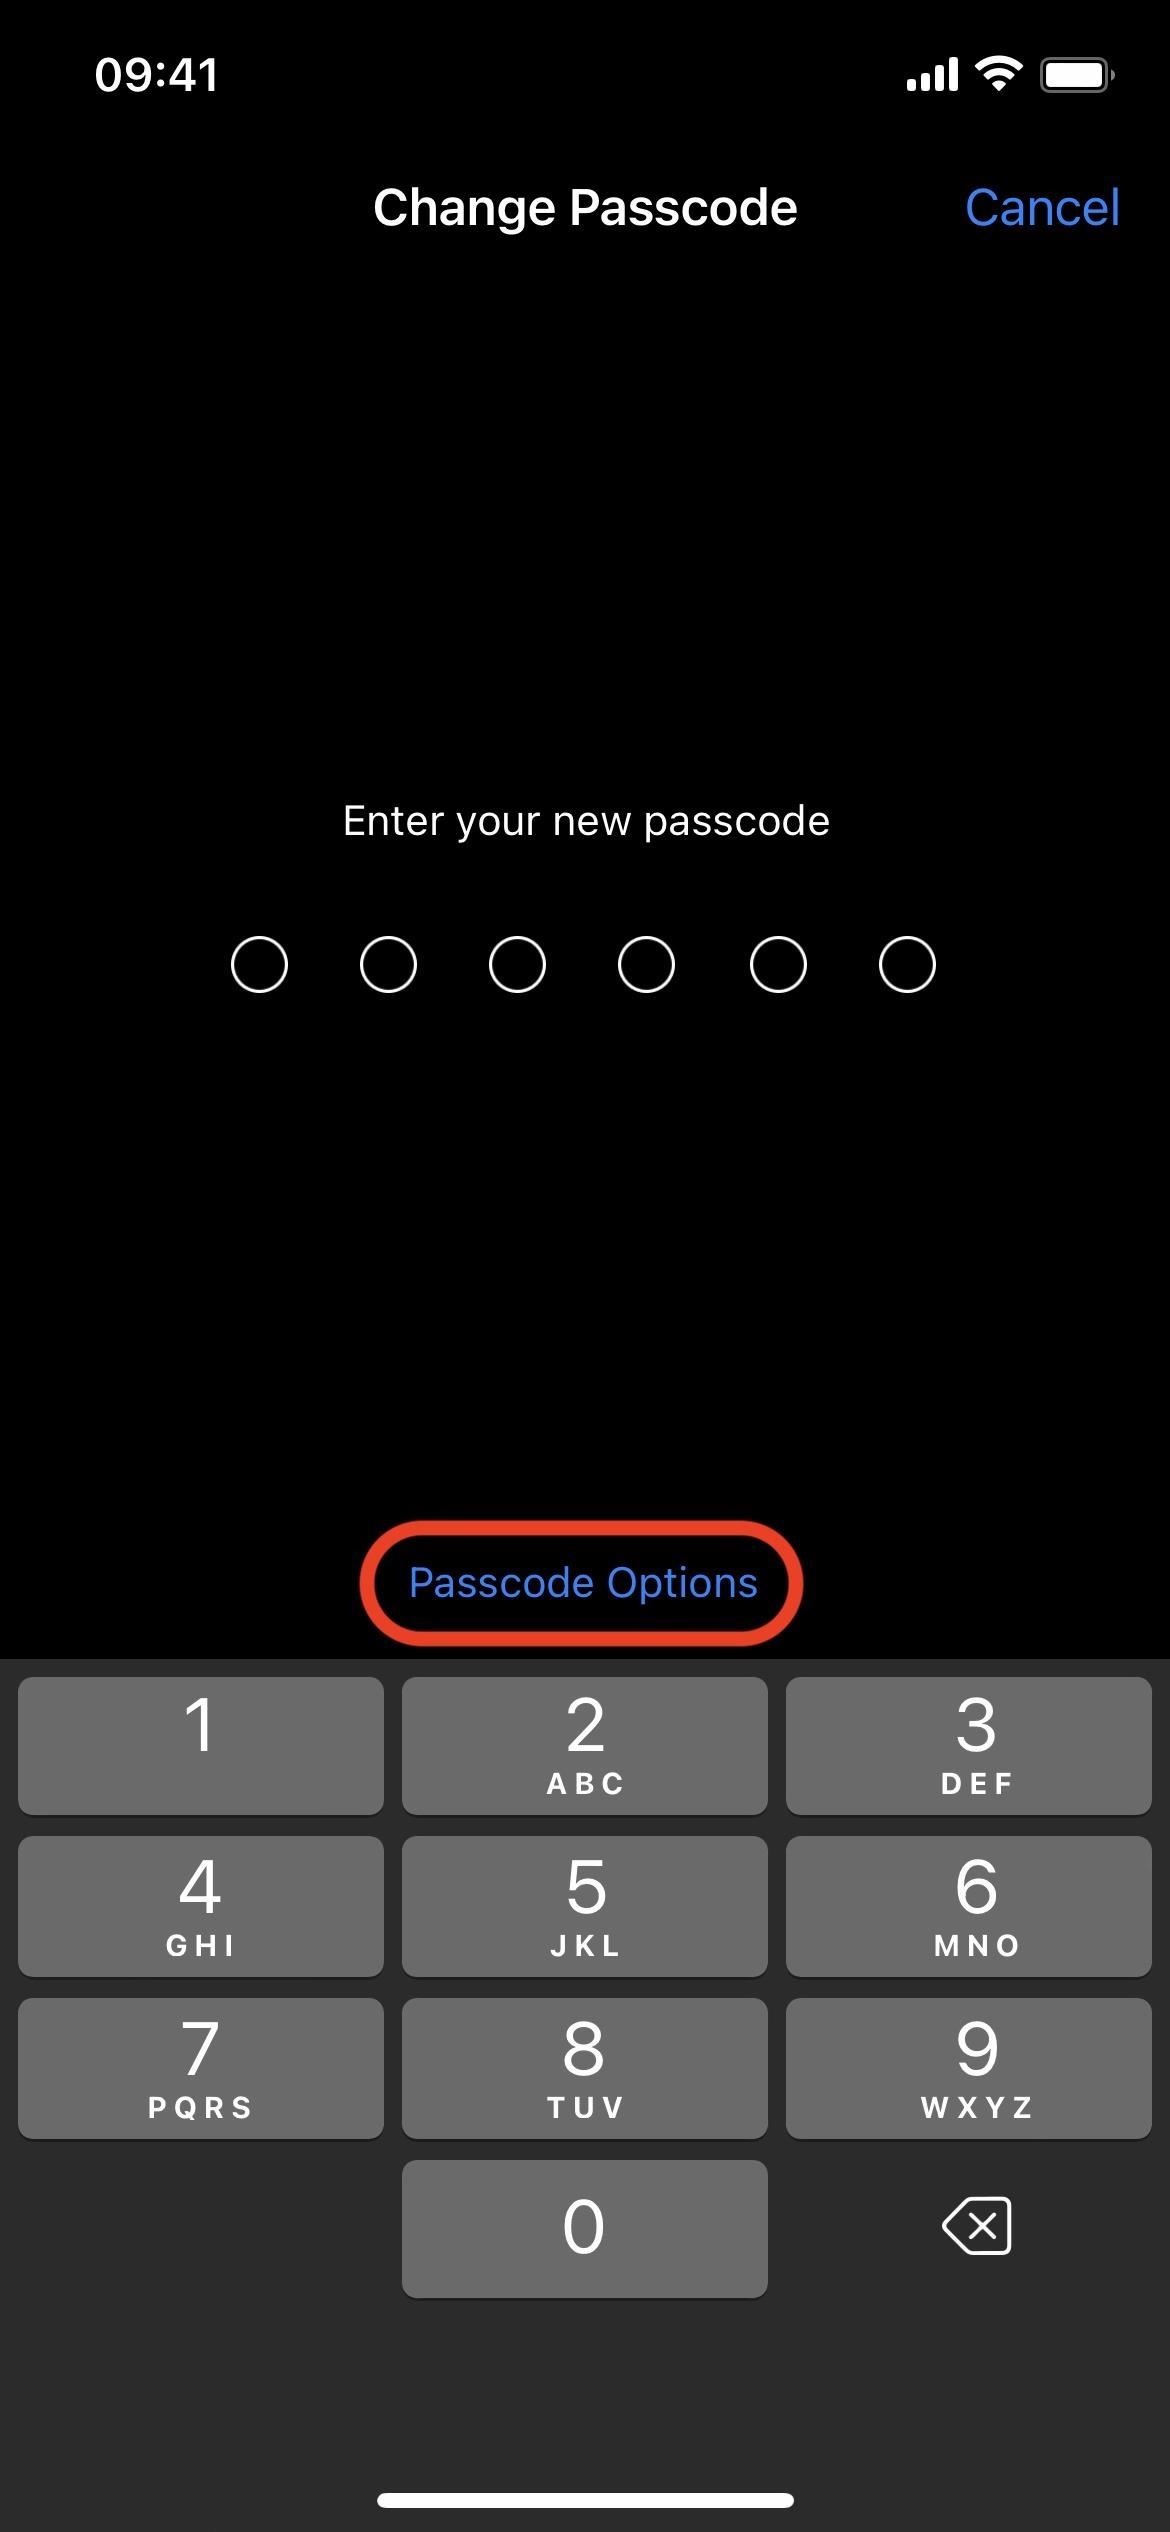 Change This One Thing on Your iPhone to Make Your Passcode Nearly Impossible to Hack